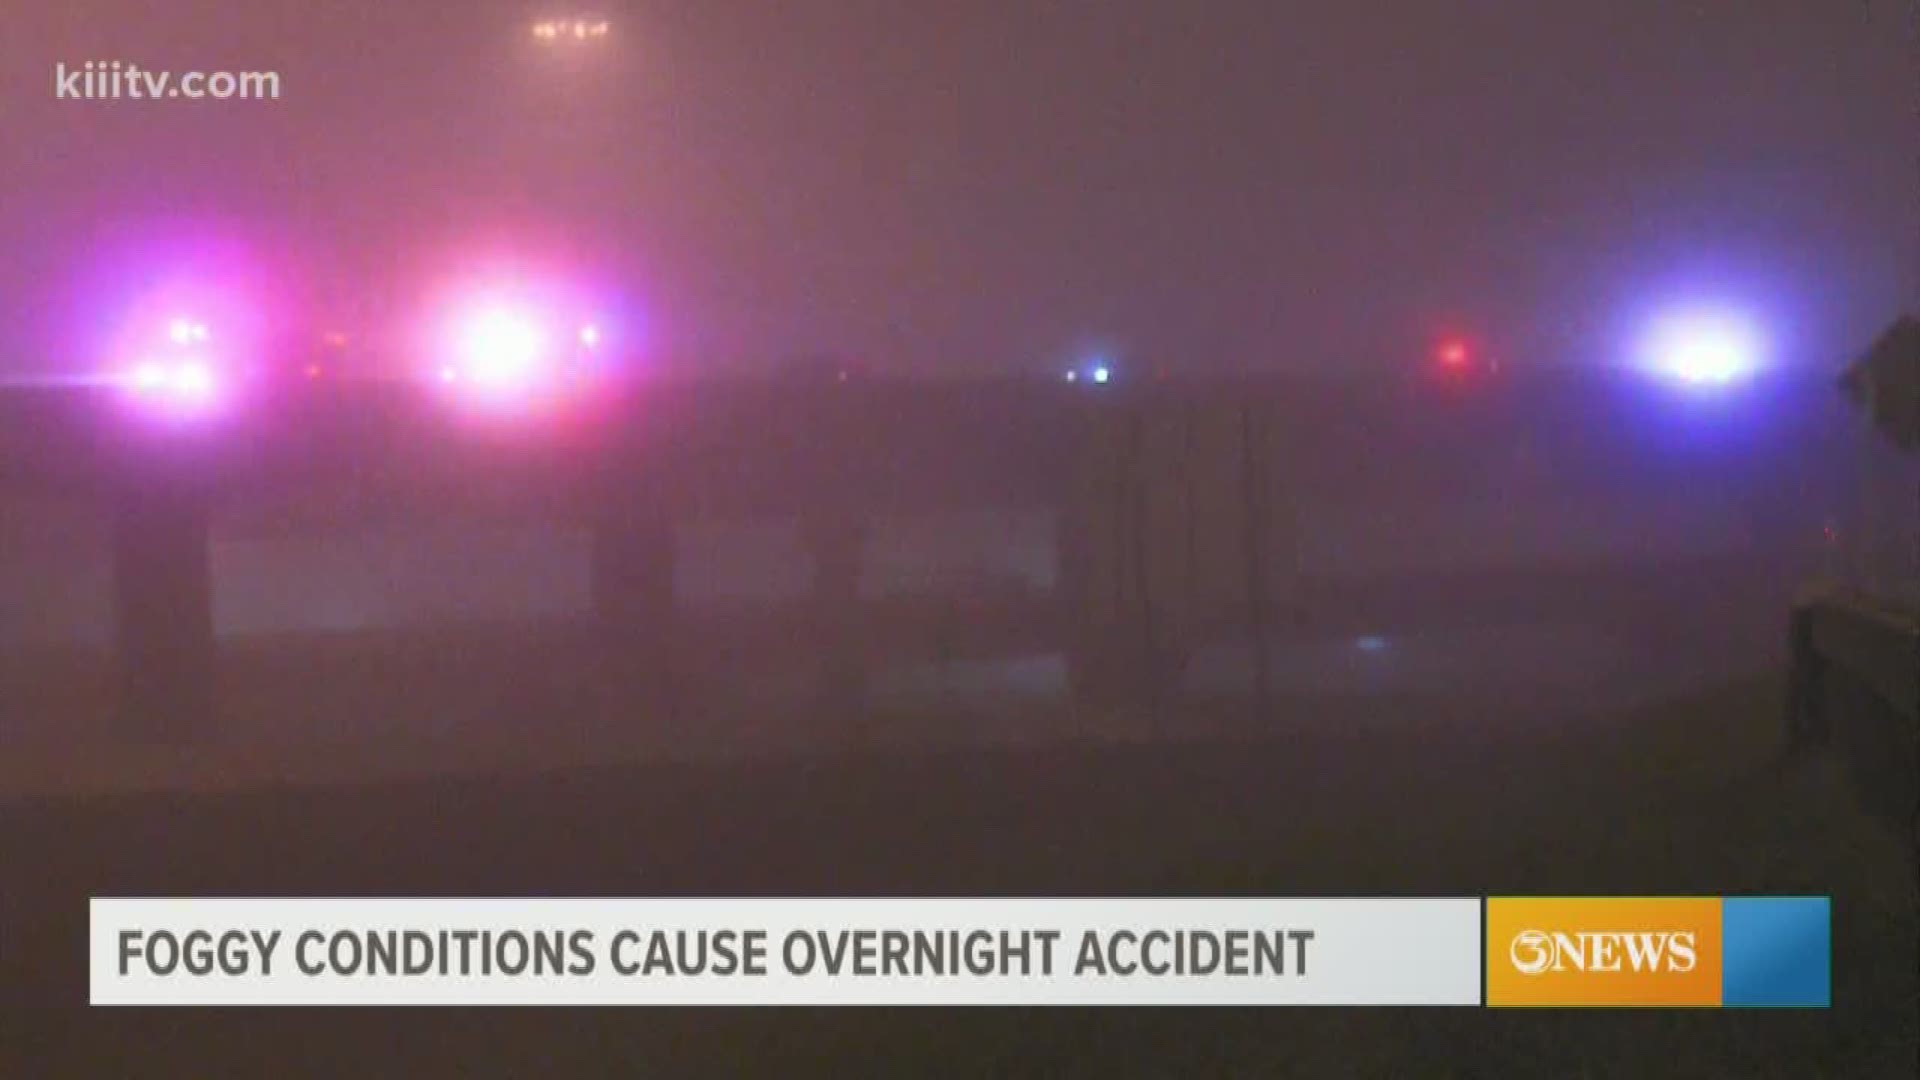 The Corpus Christi Police Department said foggy conditions were to blame for one late night accident on the Crosstown Expressway at SPID.